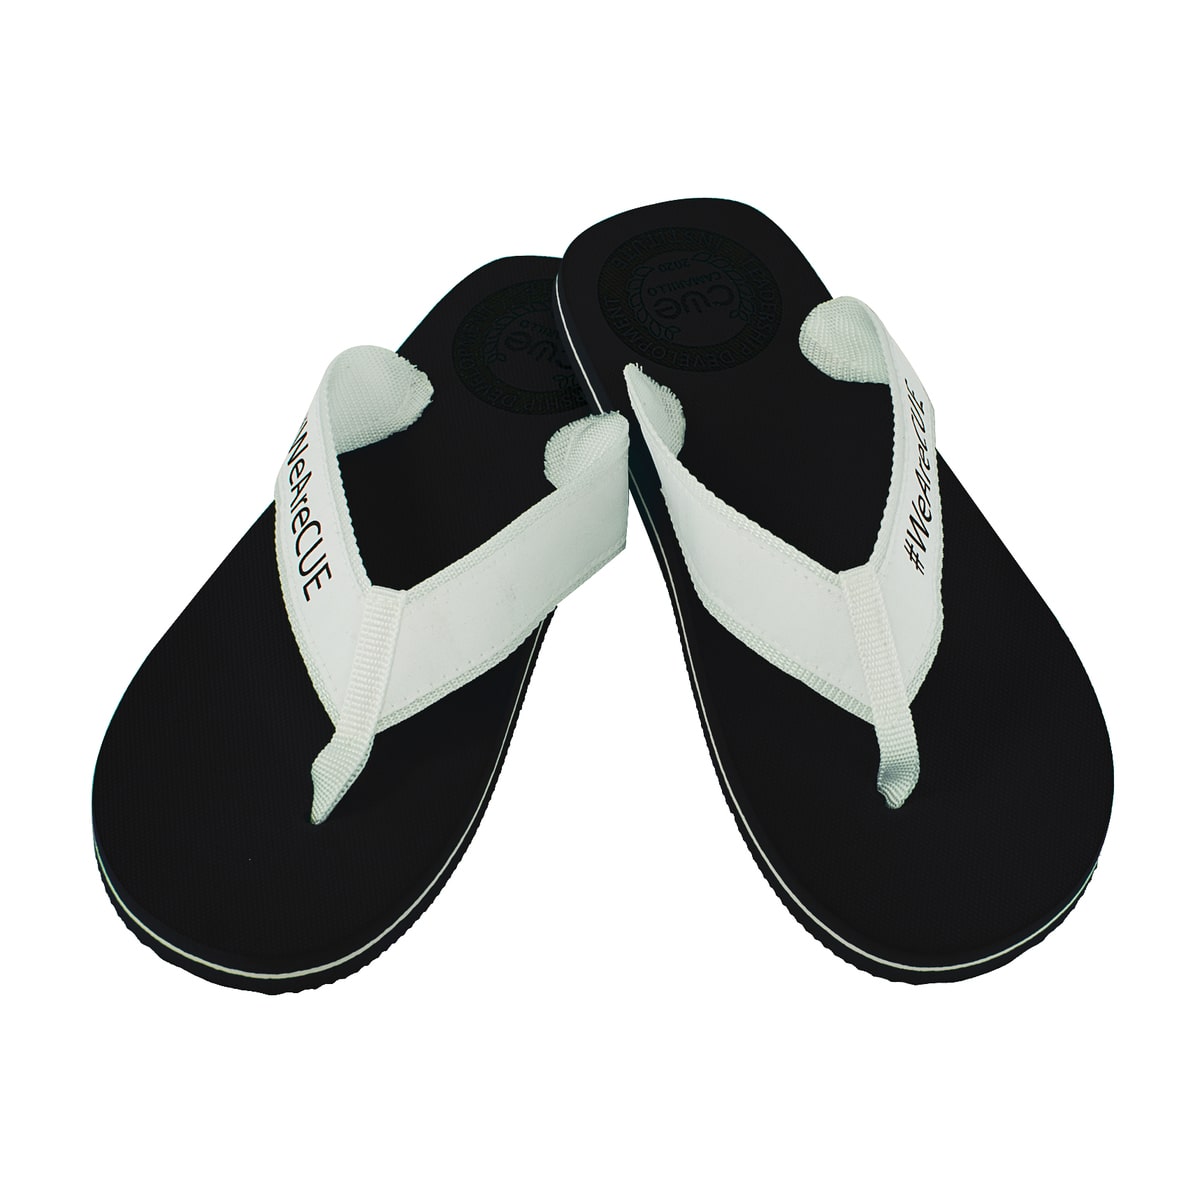 flip flops with cloth straps